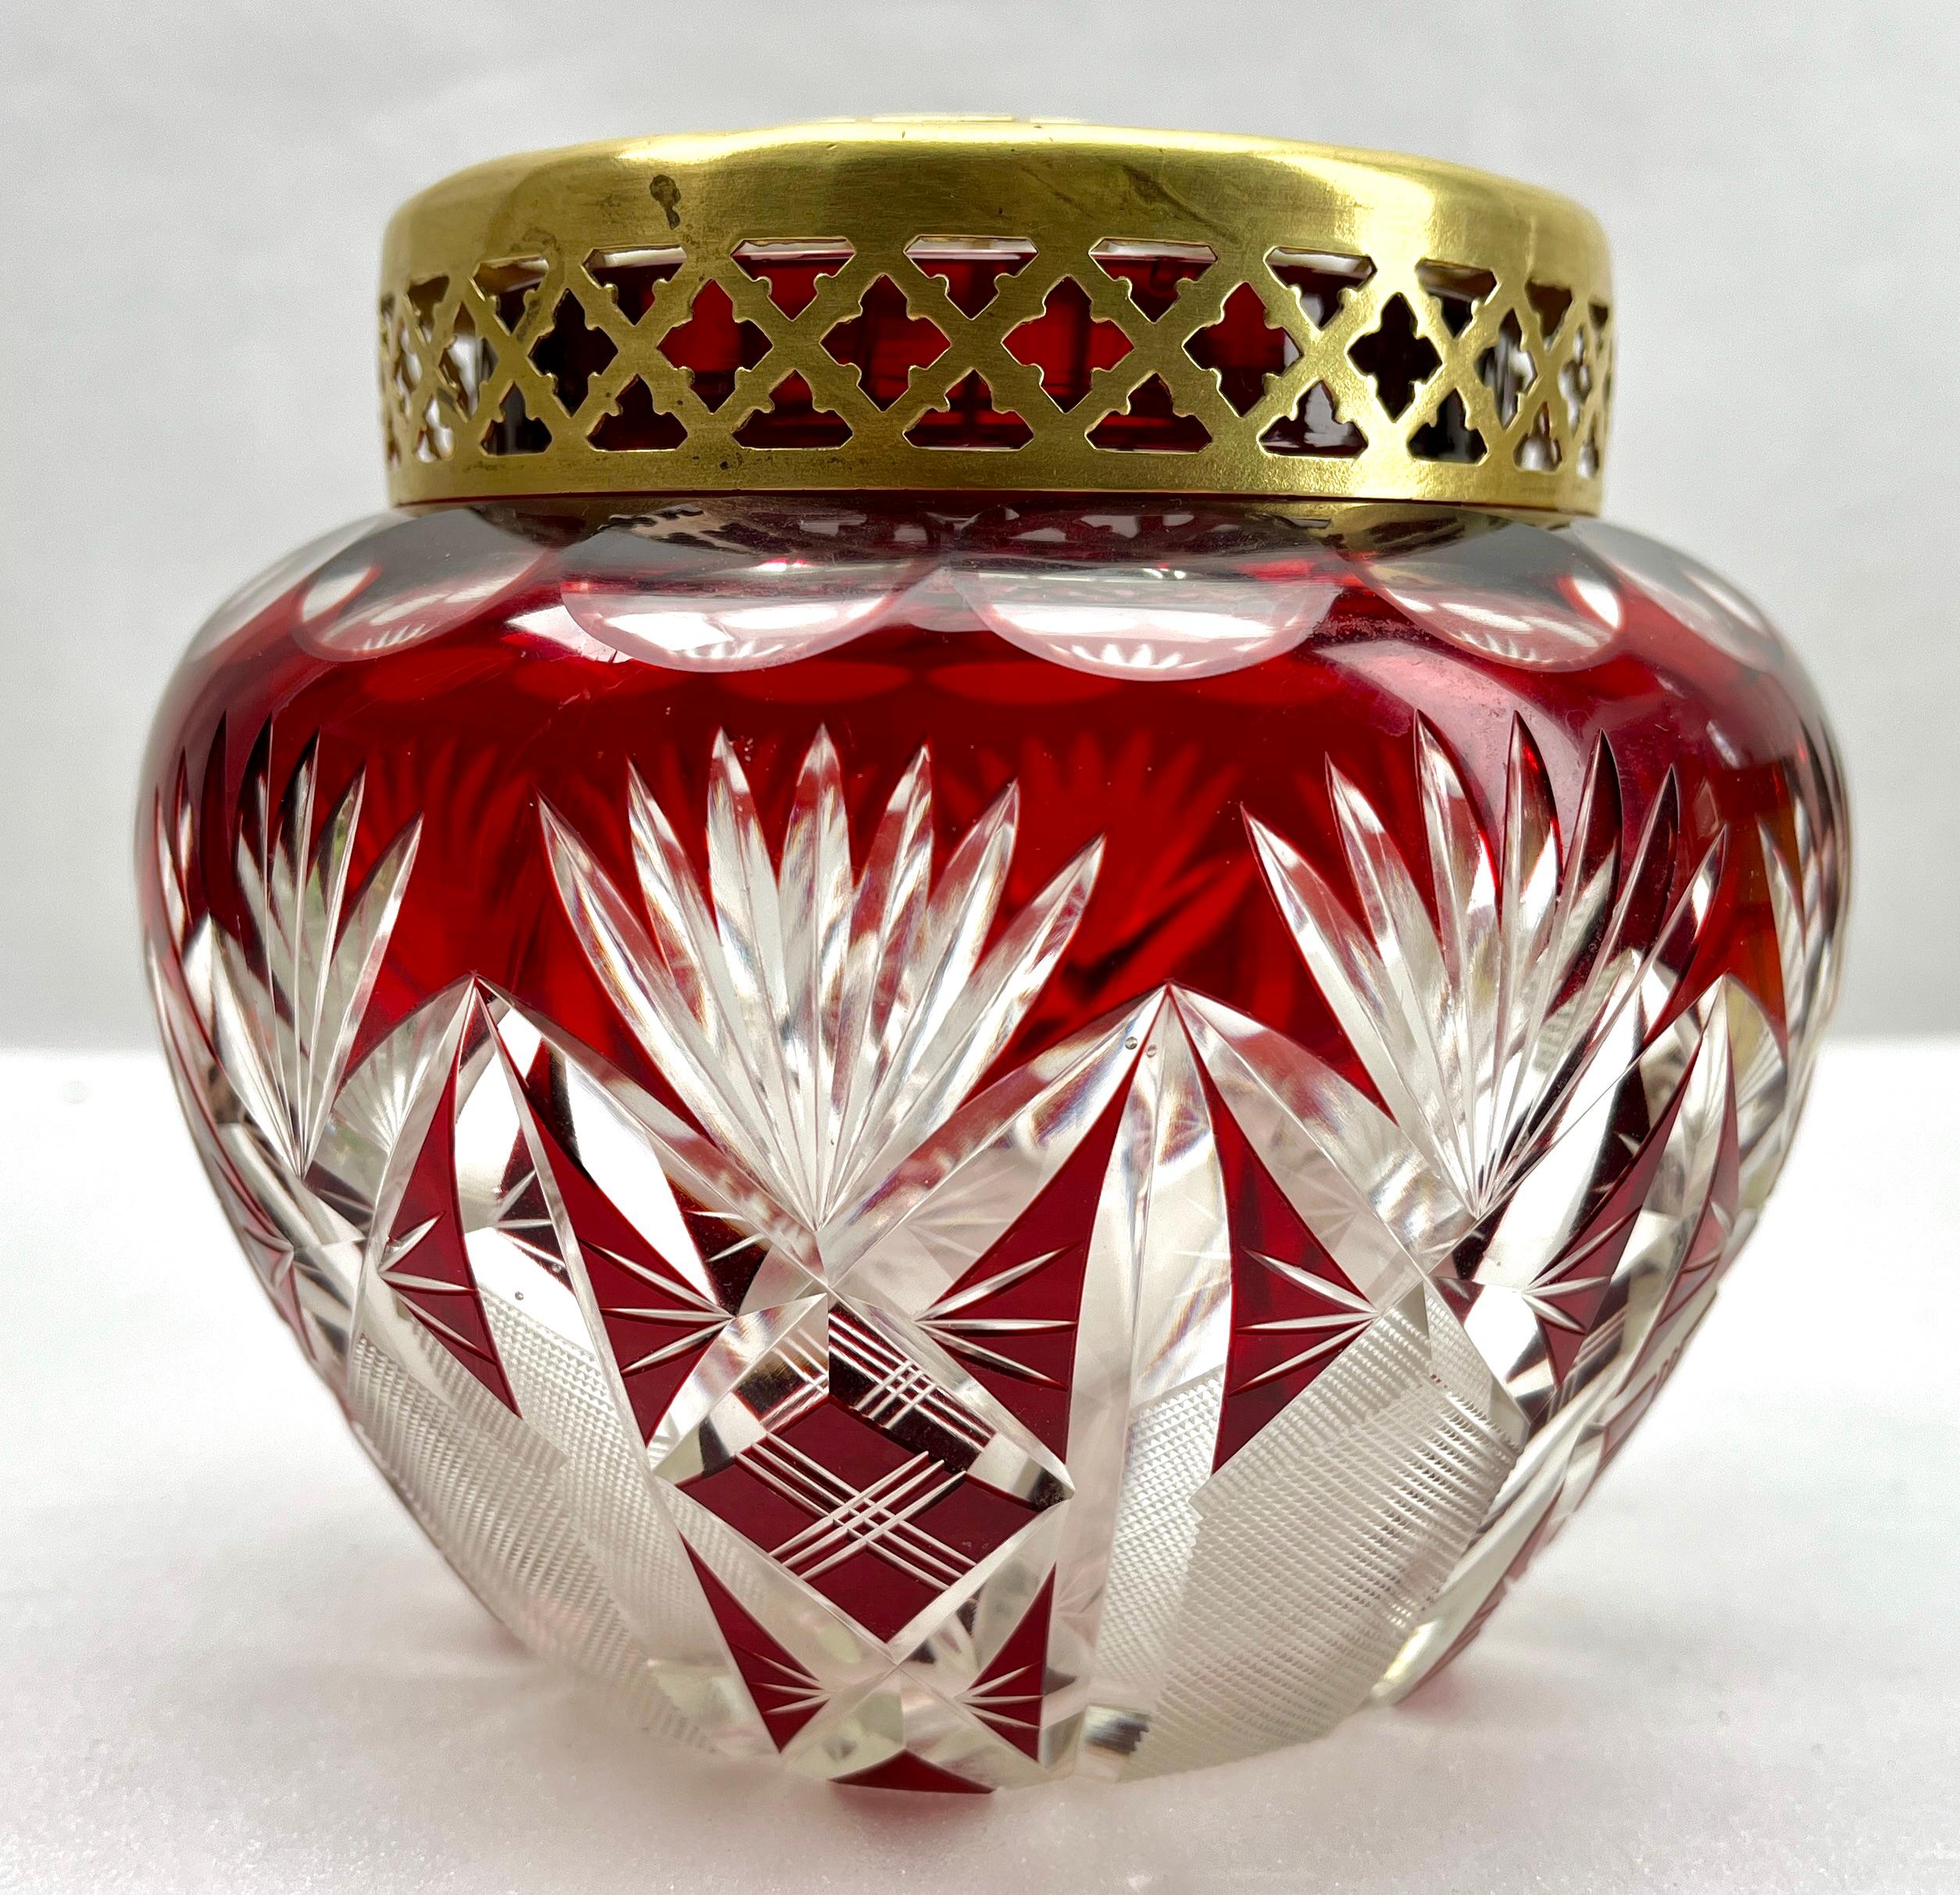 Vibrant, cased-crystal glass large 'Pique Fleurs' vase with a cut-to-clear Art Deco decoration 
This design for vases is often called 'Pique fleurs' or 'rose-bowl' and is supplied with a fitted crystal grille to support stems in an arrangement. The